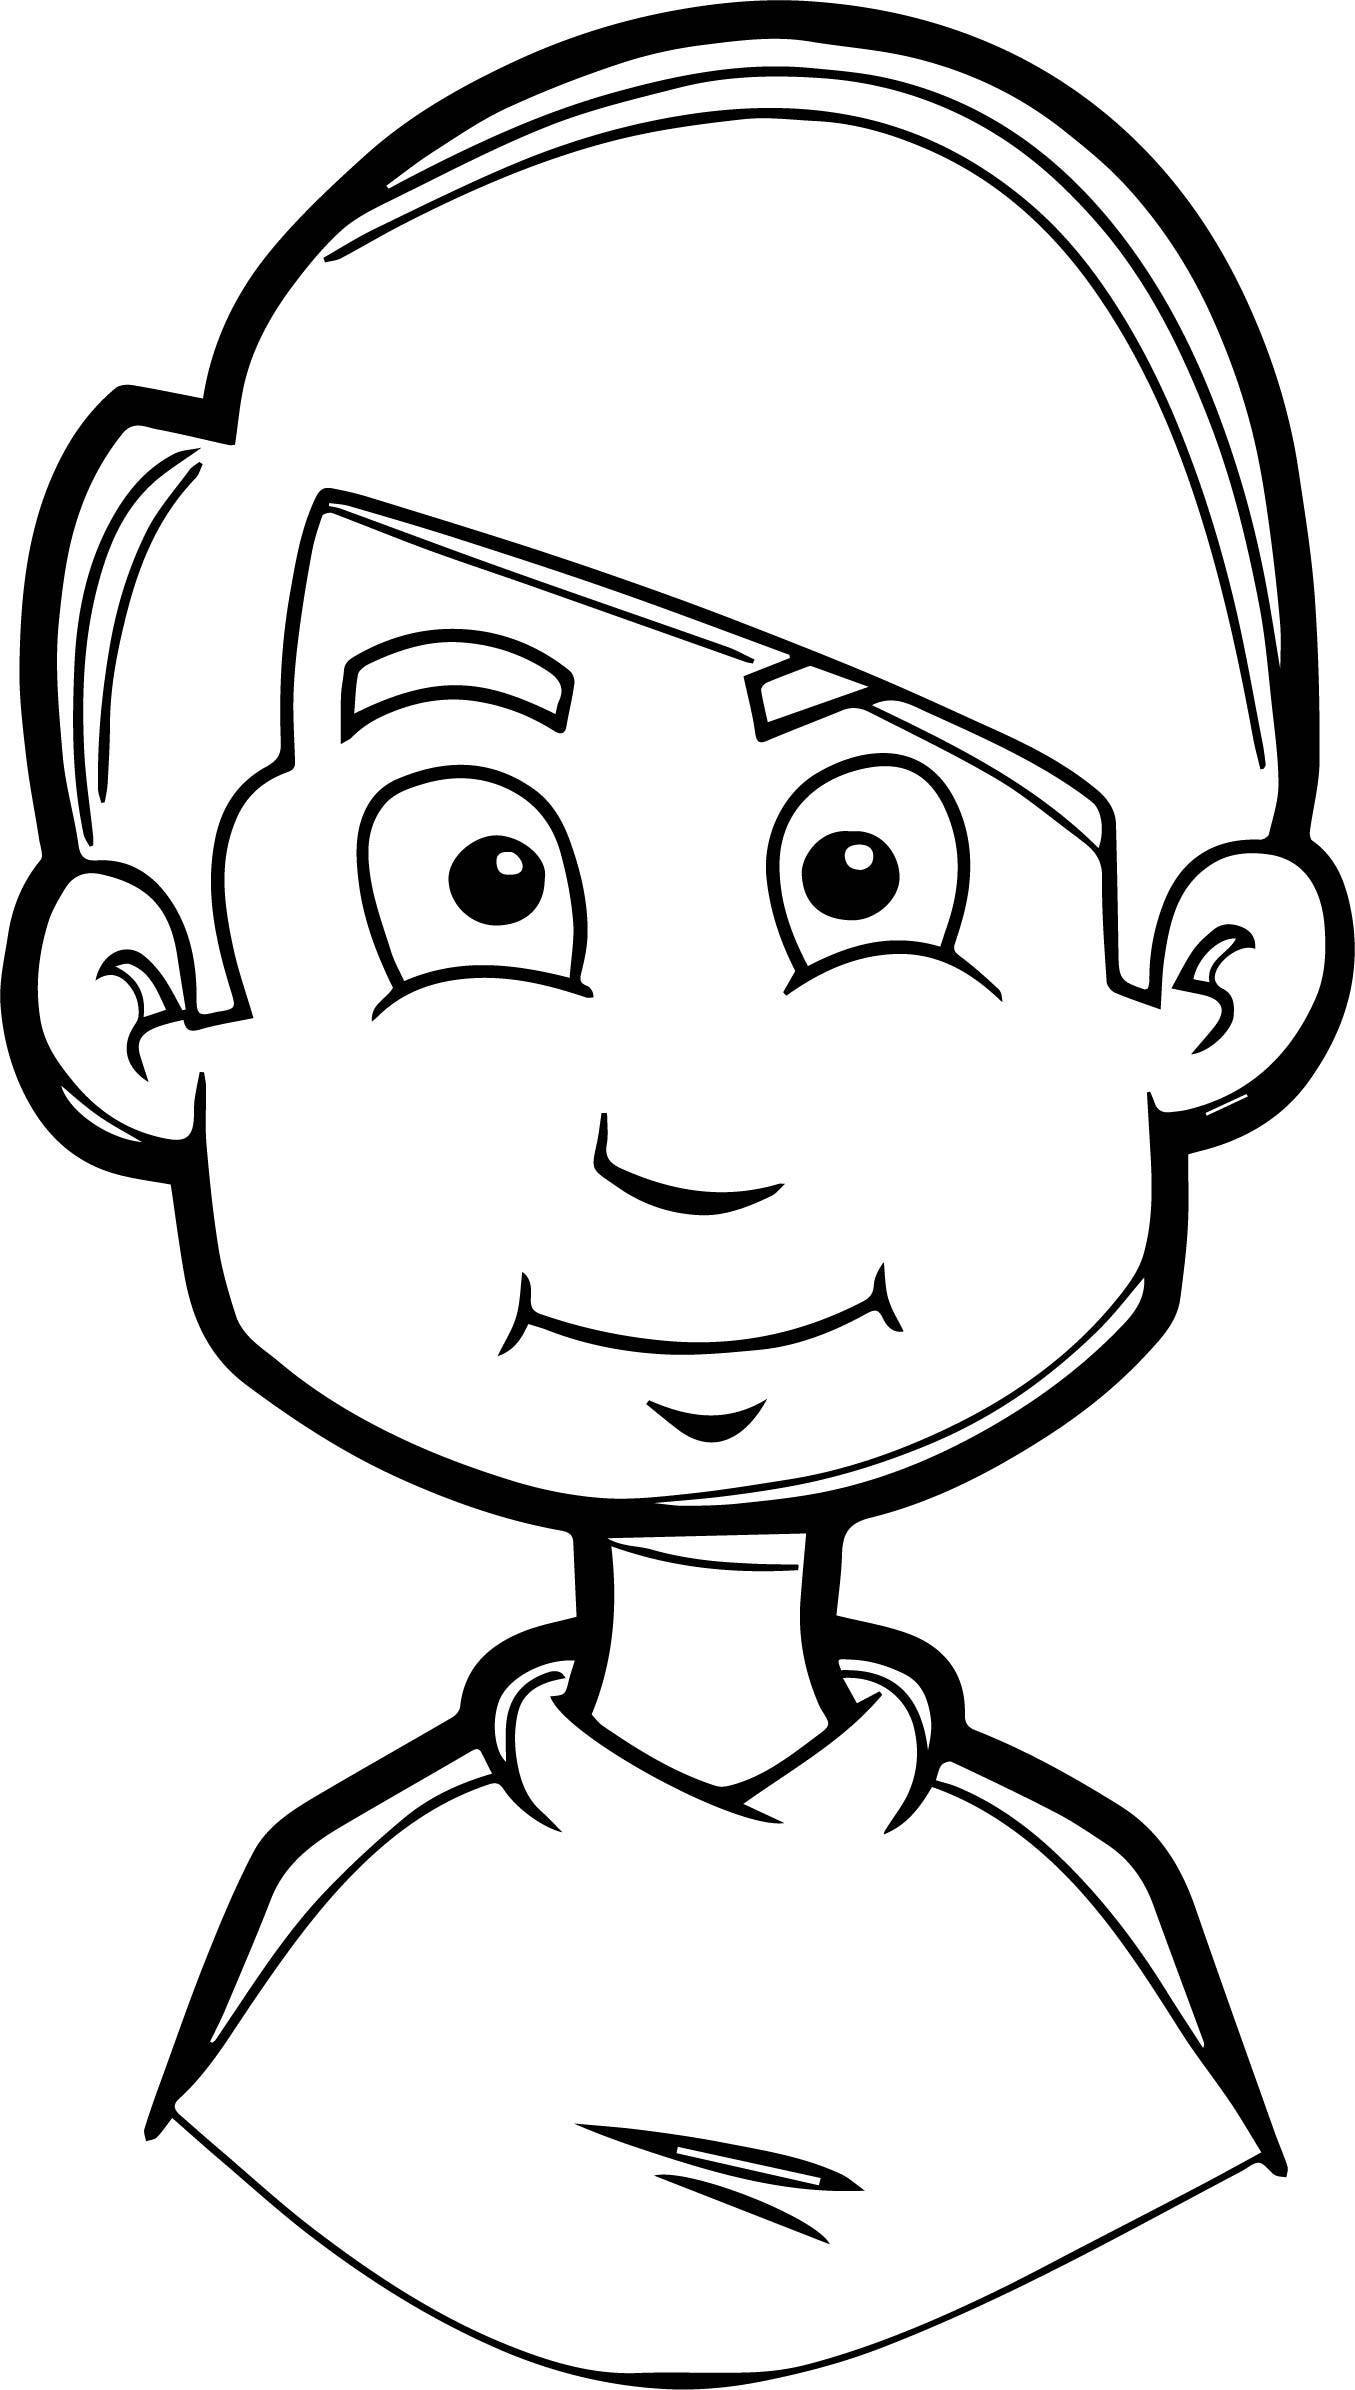 Coloring Pages Of Boys Faces
 Boy Soccer Face Coloring Page